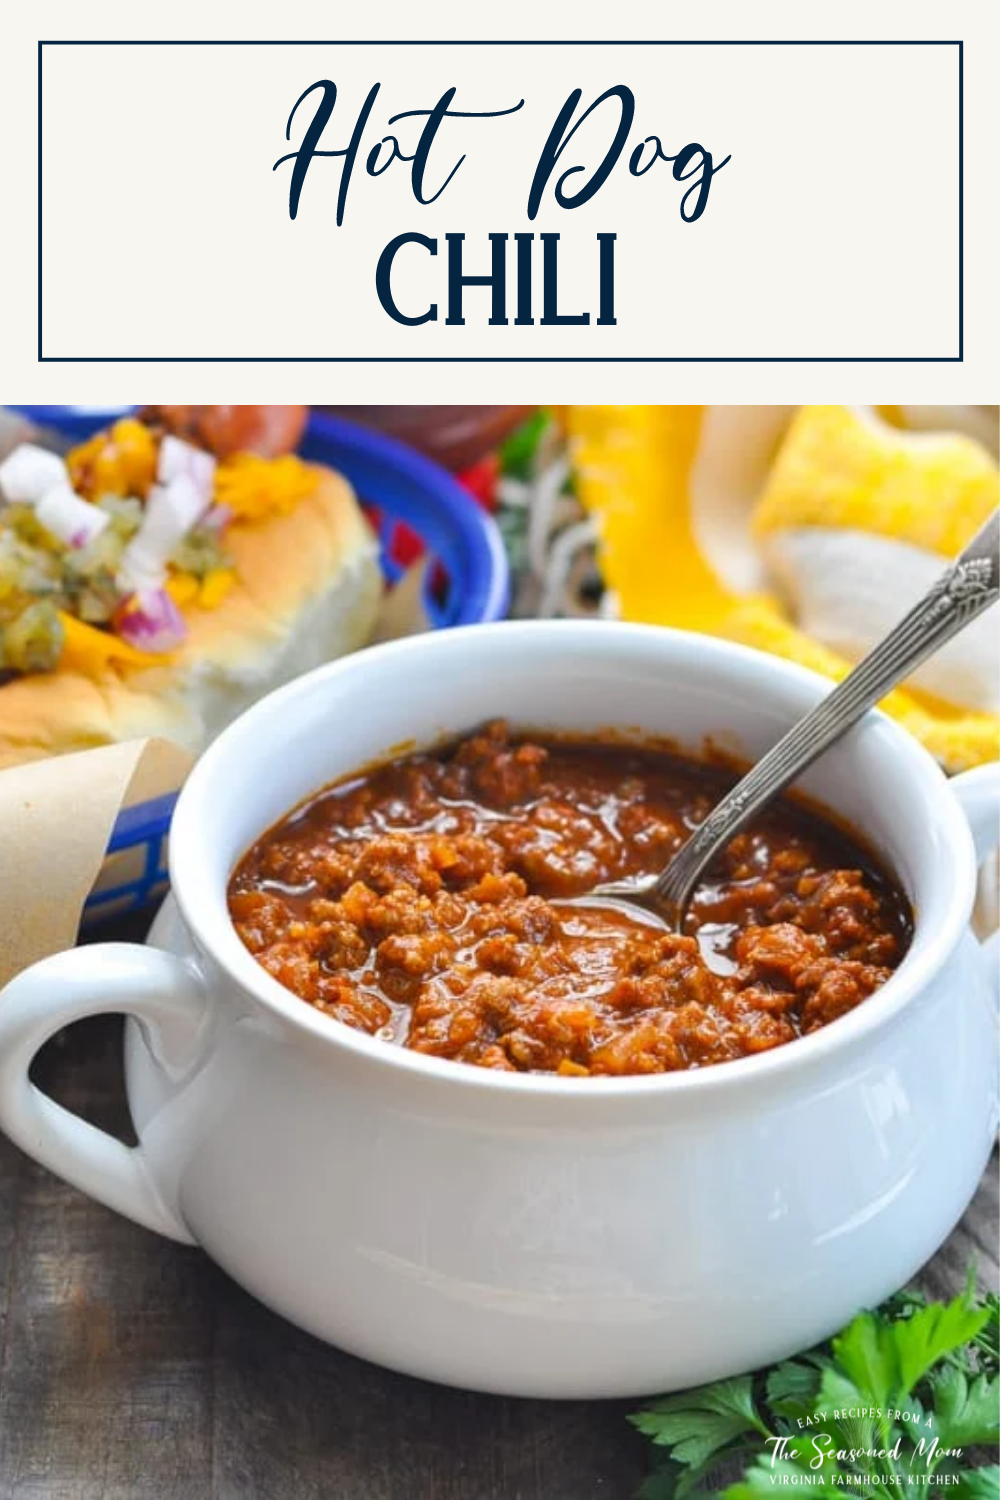 Bowl of chili for hot dogs with text title box at top